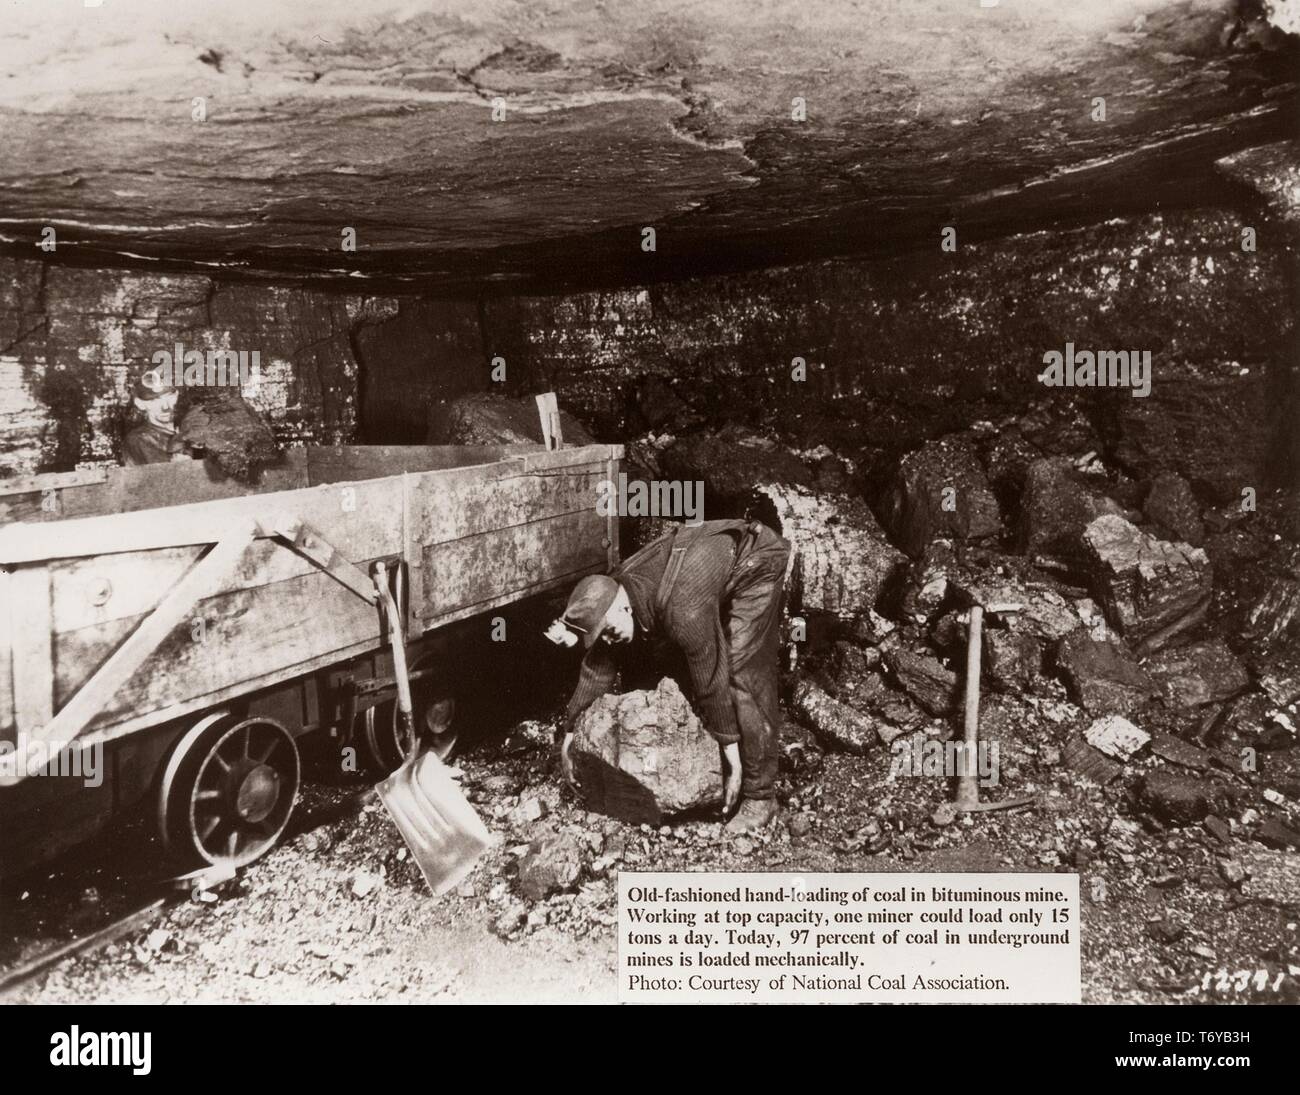 A miner, working at the end of a small, dark passage in a bituminous mine, bends down to lift a large piece of coal into an open rail car, 1920. Image courtesy National Coal Association/US Department of Energy. () Stock Photo